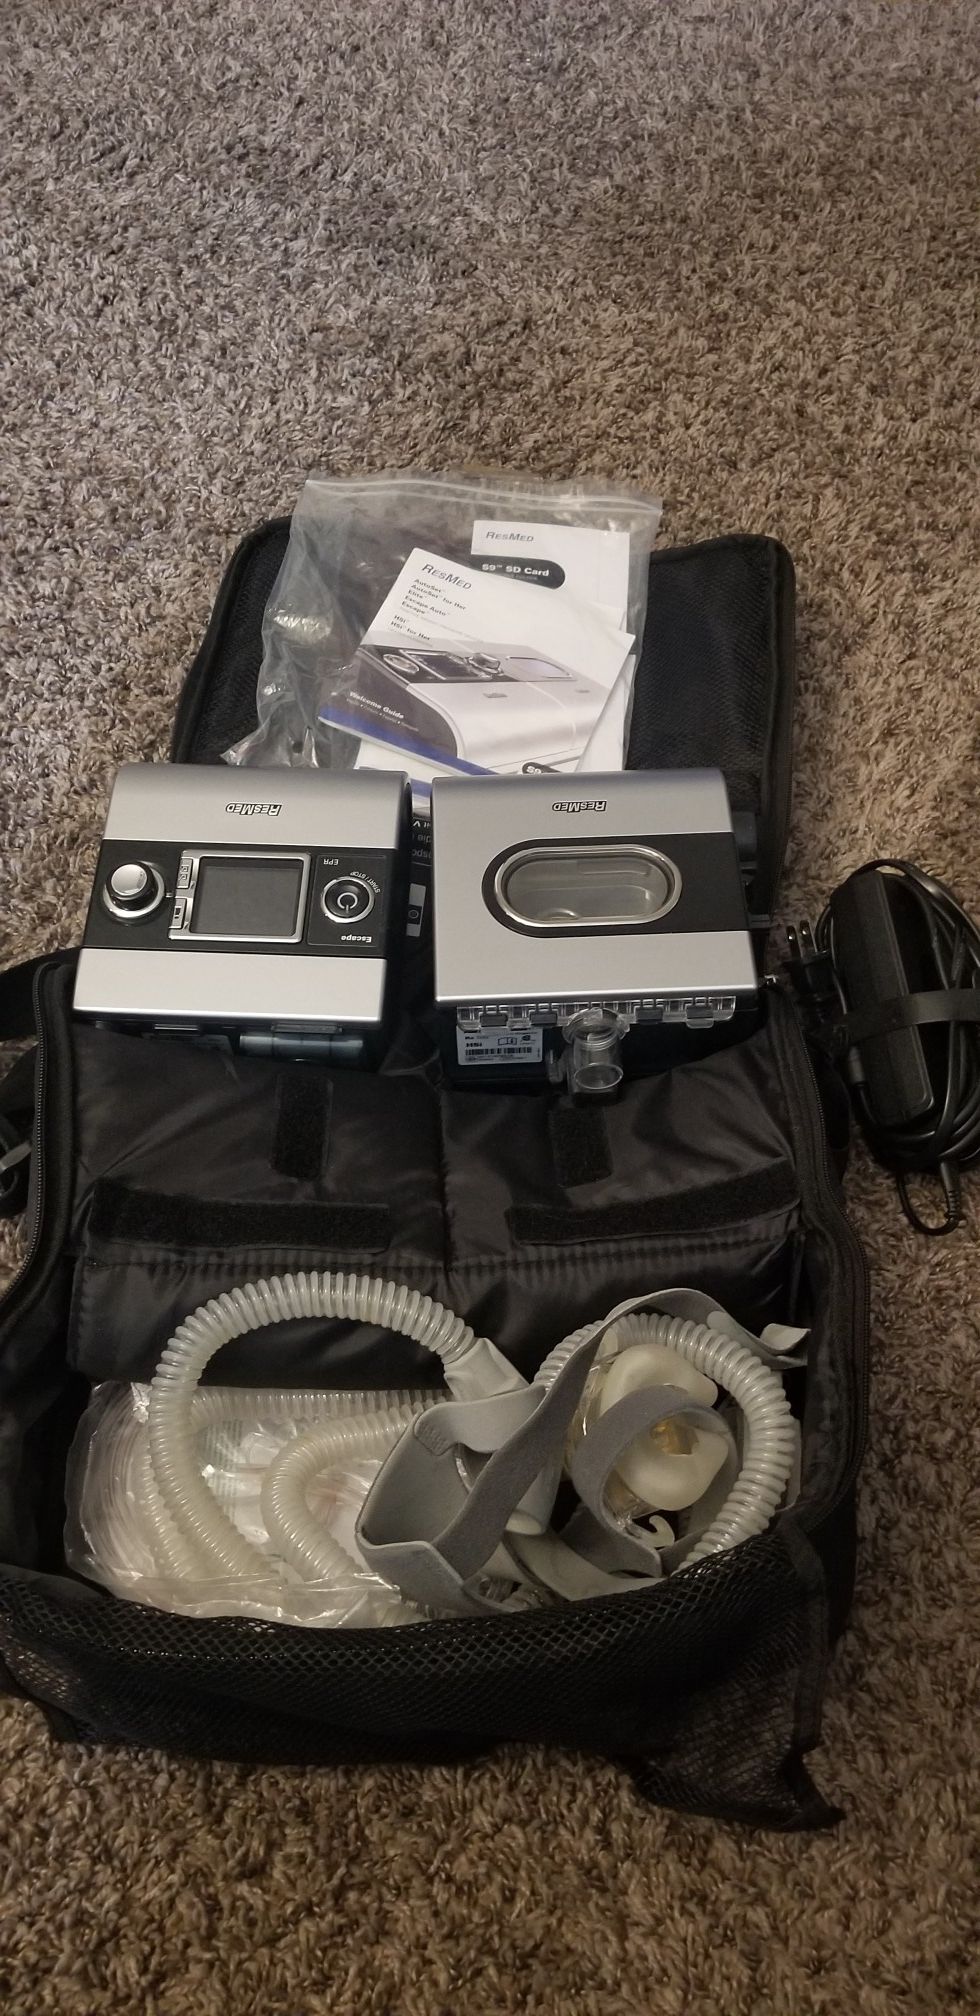 ResMed Cpap machine, like New!